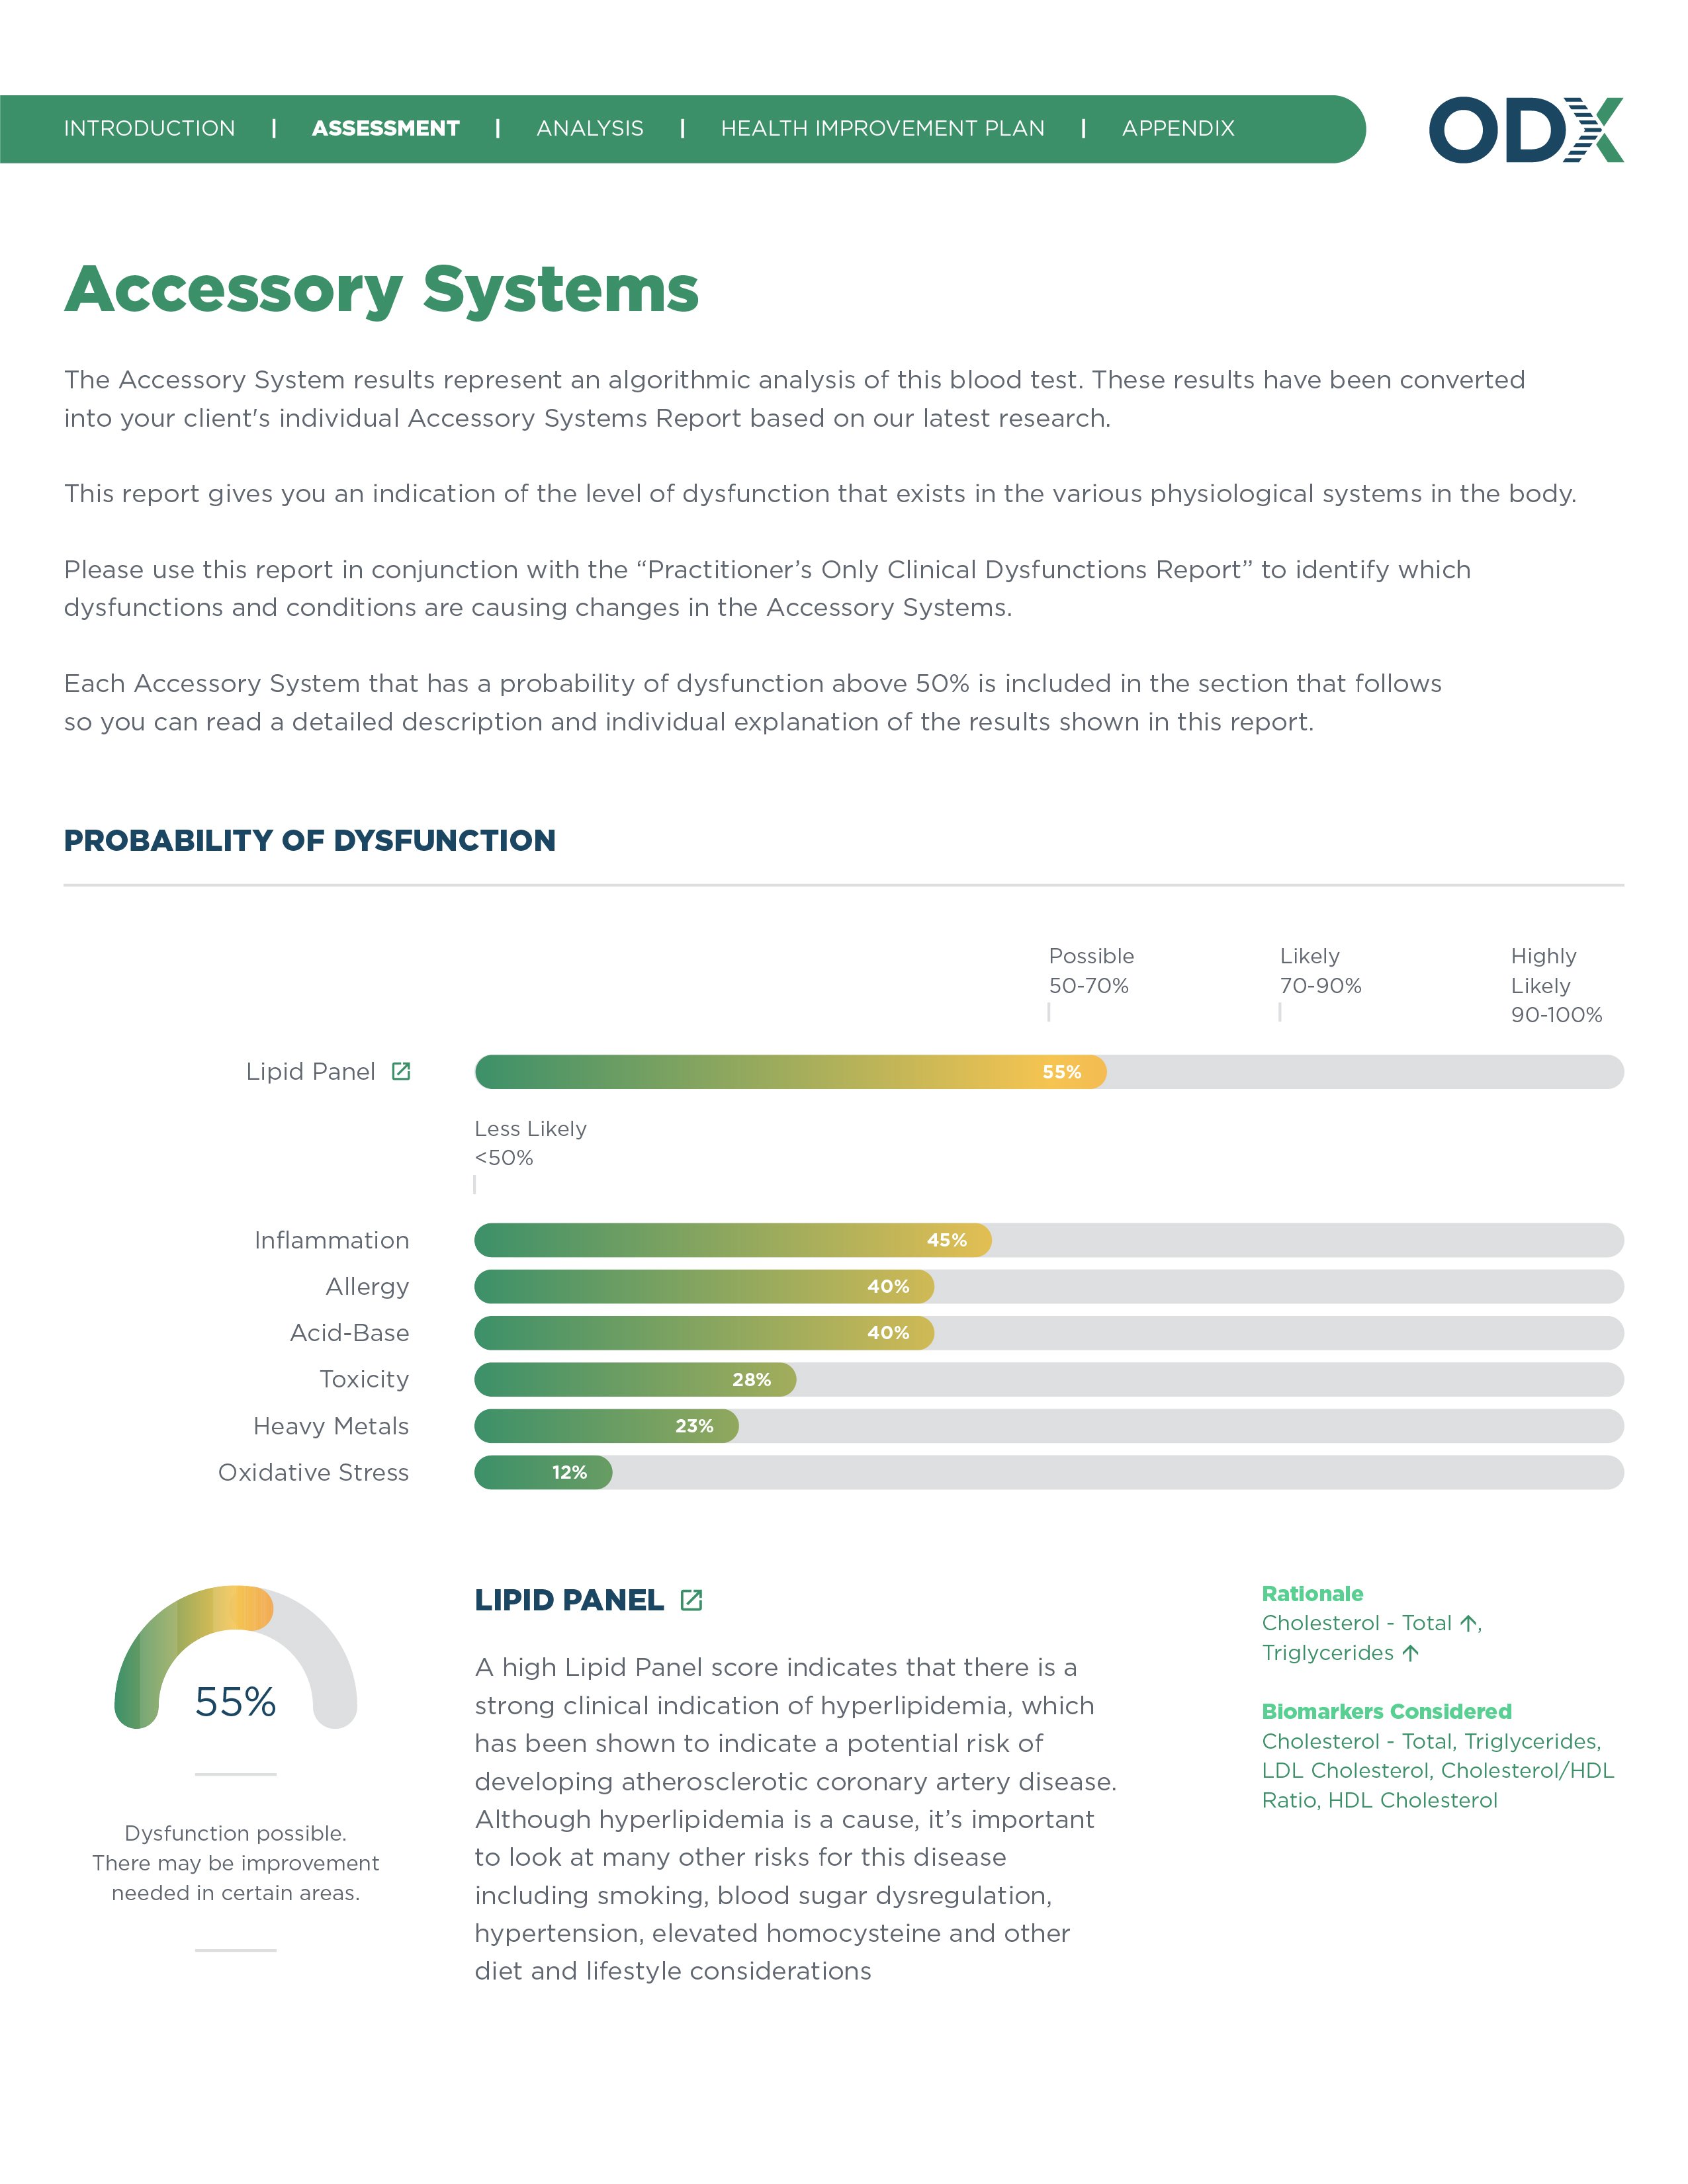 All Report Design for New Site_Accessory Systems